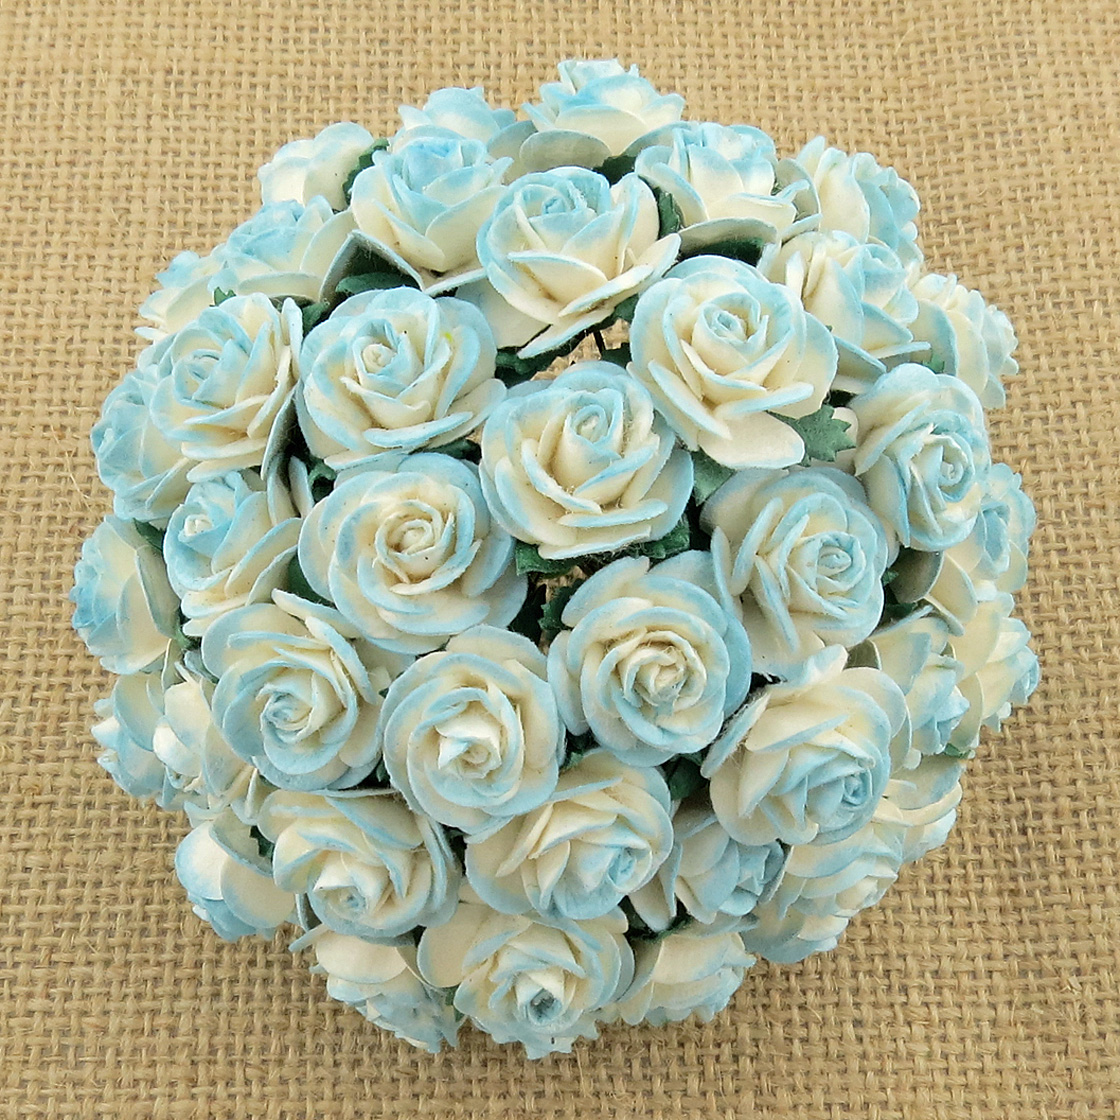 100 2-TONE LT. TURQUOISE MULBERRY PAPER OPEN ROSES